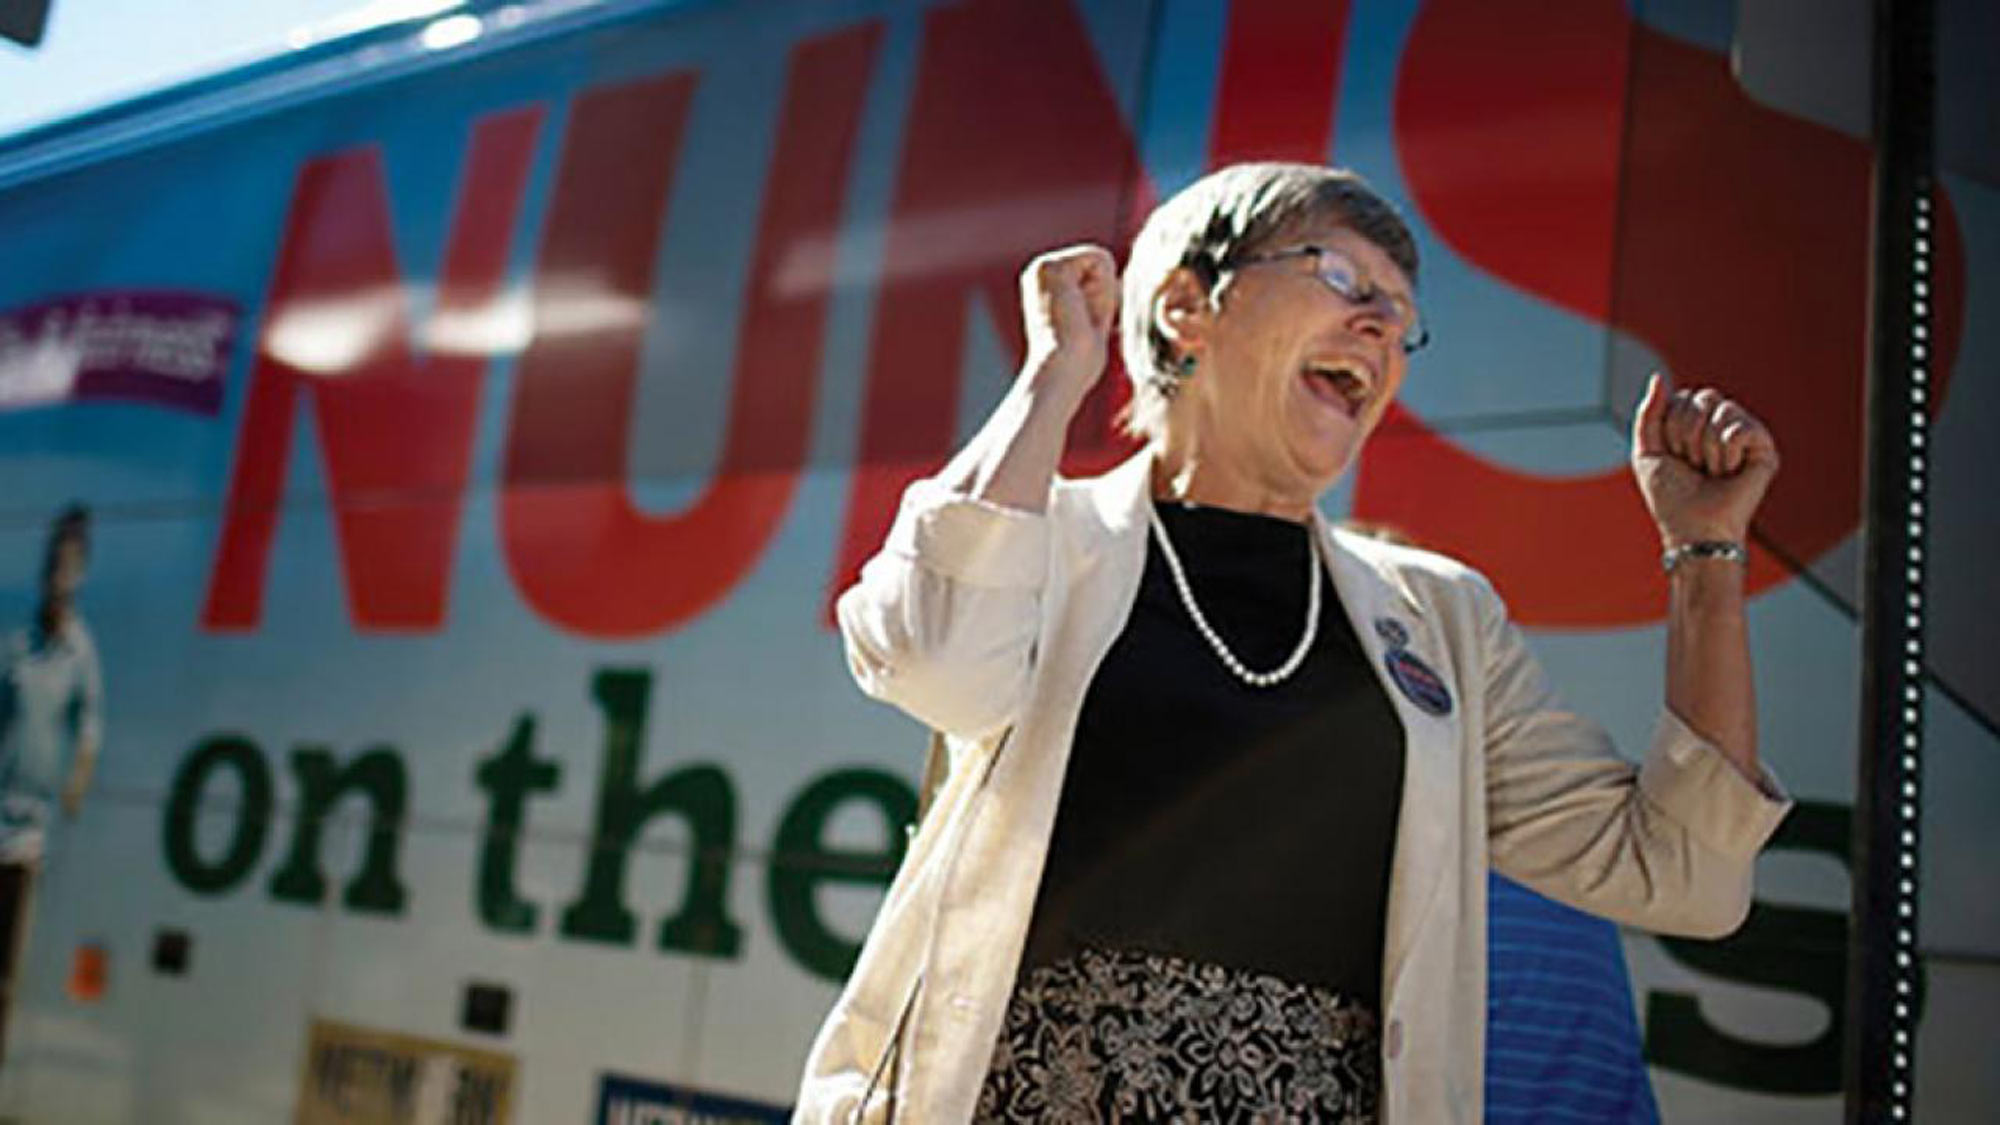 Sister Simone Campbell greets supporters at a stop in South Bend, Indiana, on the first Nuns on the Bus tour in 2012. (James Brosher/South Bend Tribune)